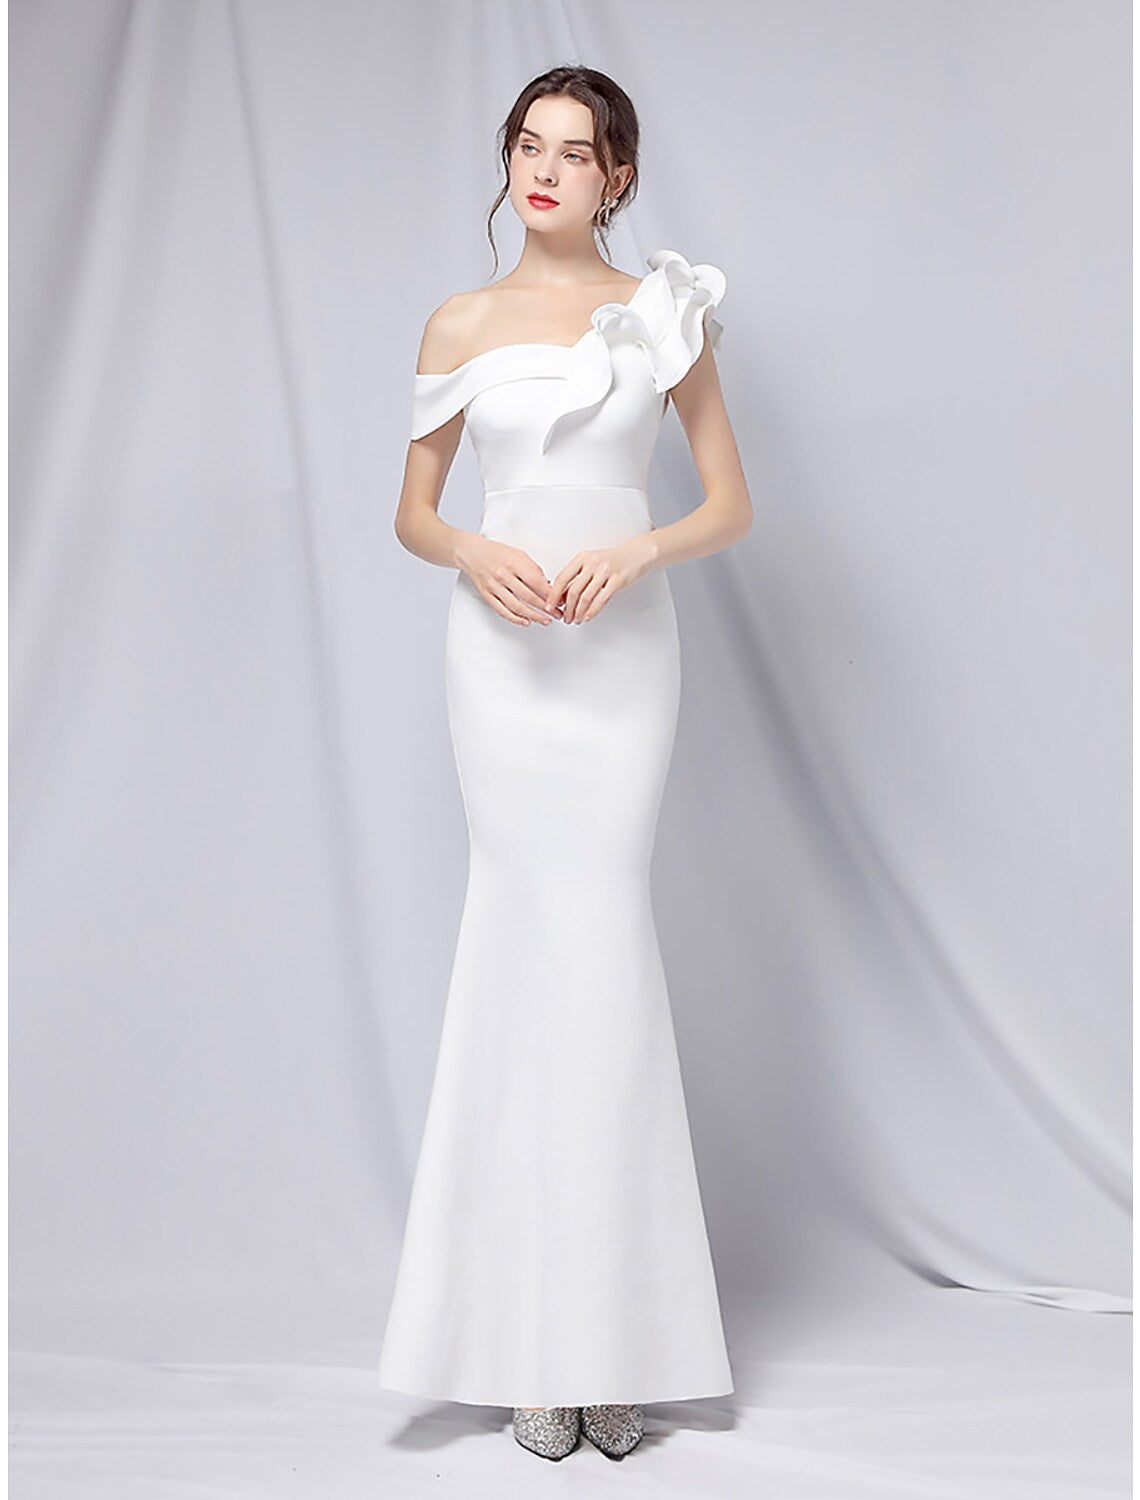 Evening Gown Dress Wedding Guest Floor Length Short Sleeve One Shoulder Stretch Satin with Ruffles